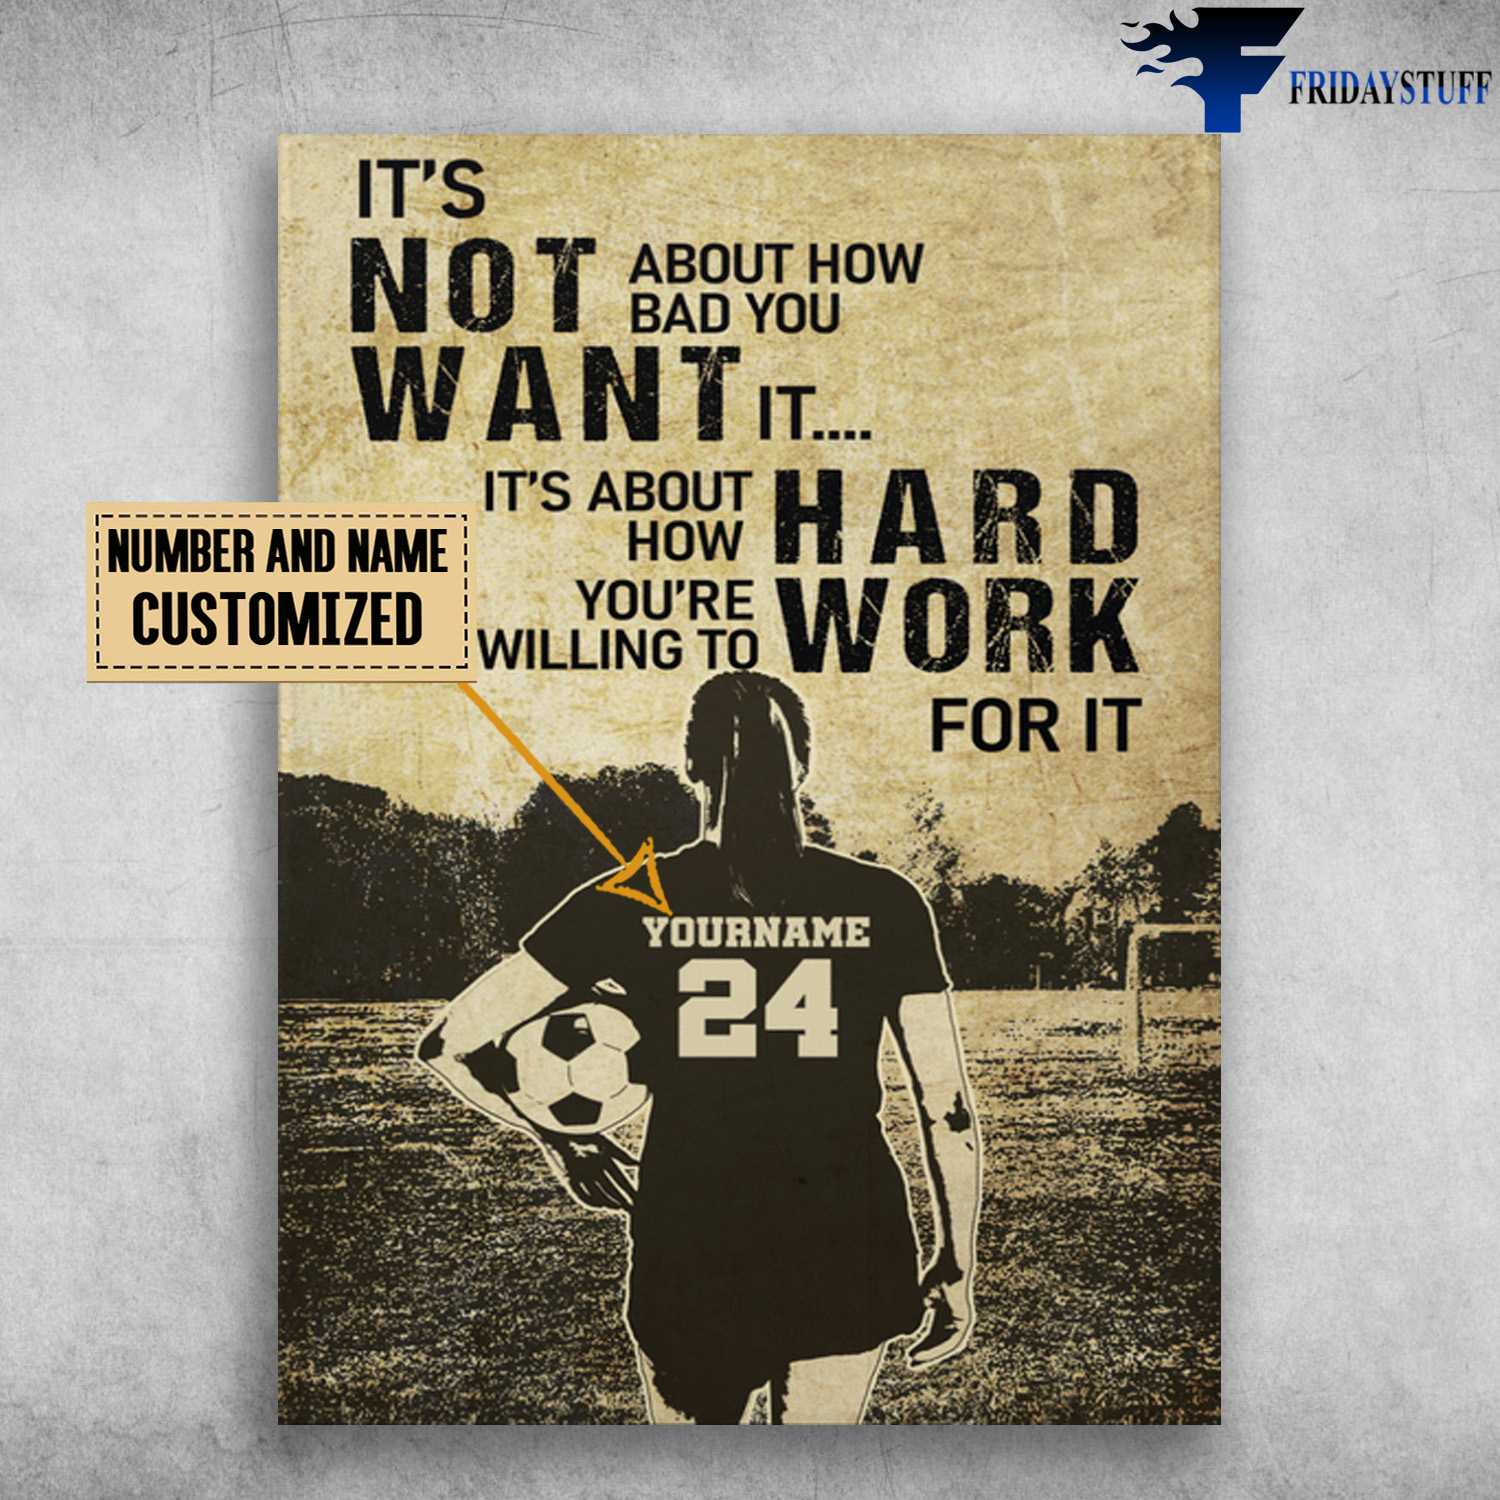 Soccer Player, Girl Loves Football, It's Not About How Bad You Want It, It's About How You're Willing To Hard Rork For It